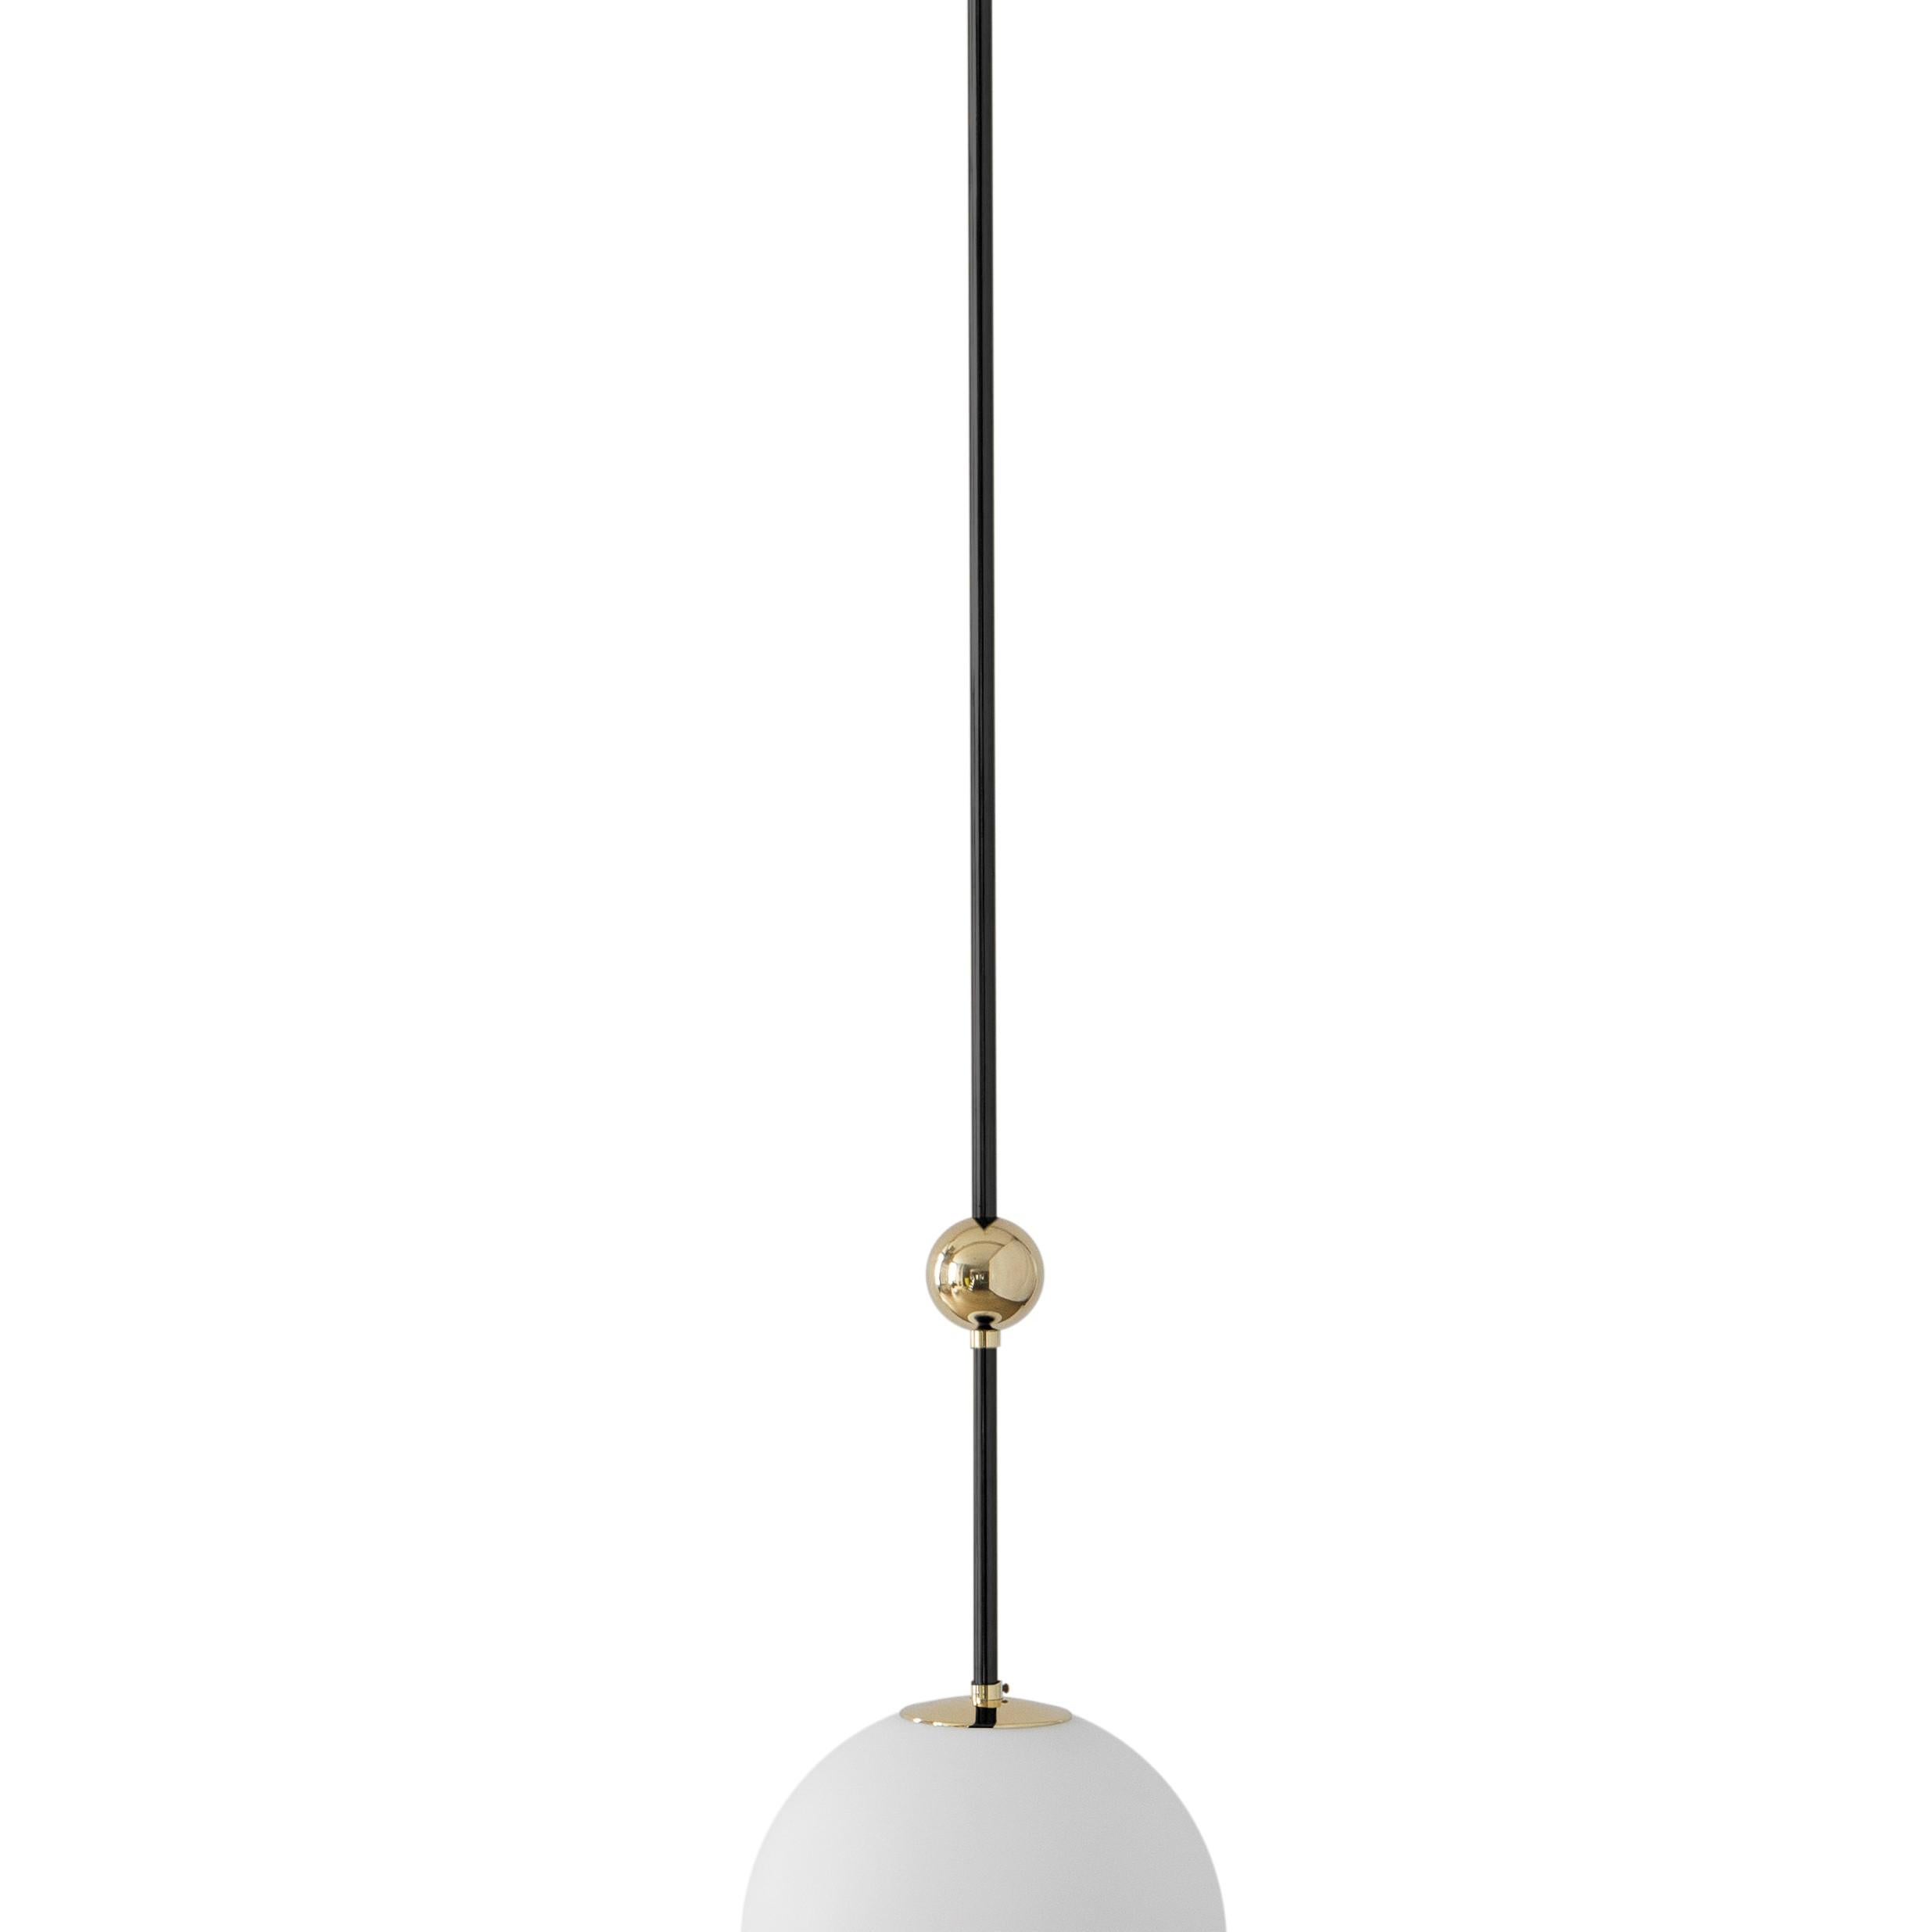 Pendant 02 black by Magic Circus Editions
Dimensions: D 25 x W 25 x H 130 cm, also available in H 110, 150, 175, 190 cm
Materials: Brass, mouth blown glass

All our lamps can be wired according to each country. If sold to the USA it will be